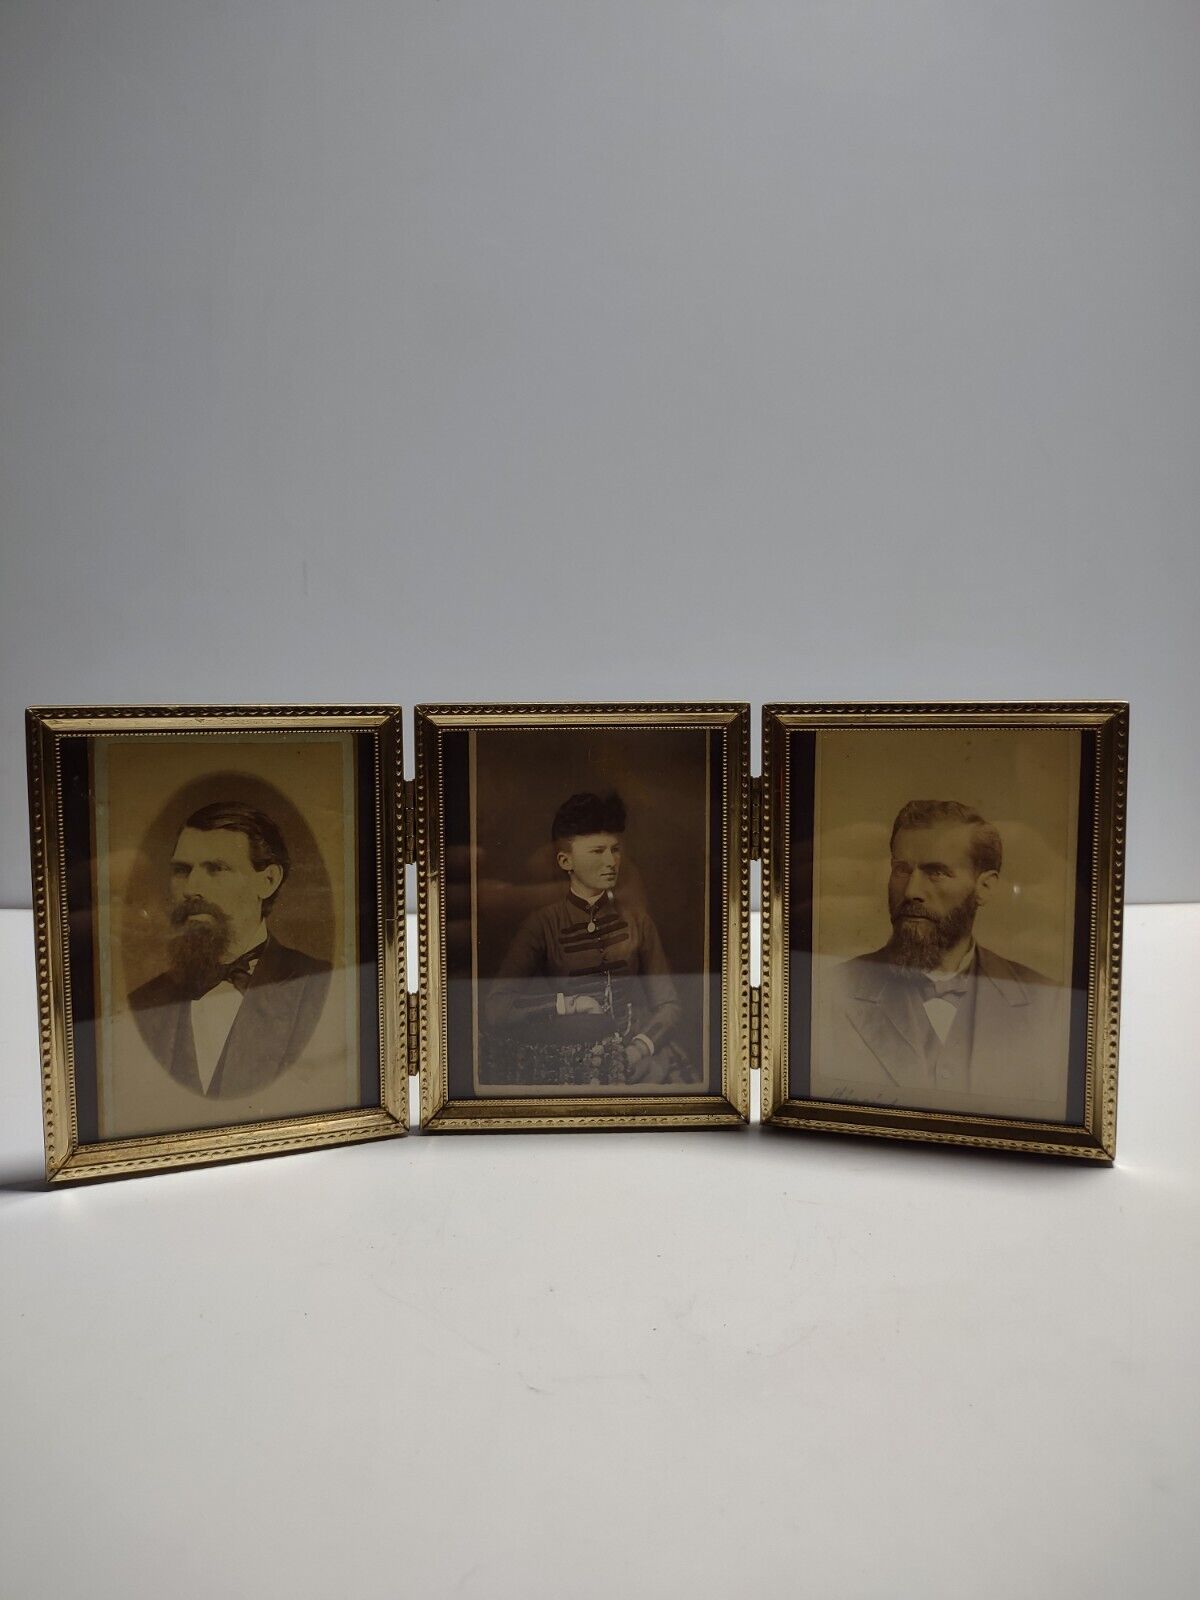 Antique/Vintage Photographs With 3 Way Frame In Gold